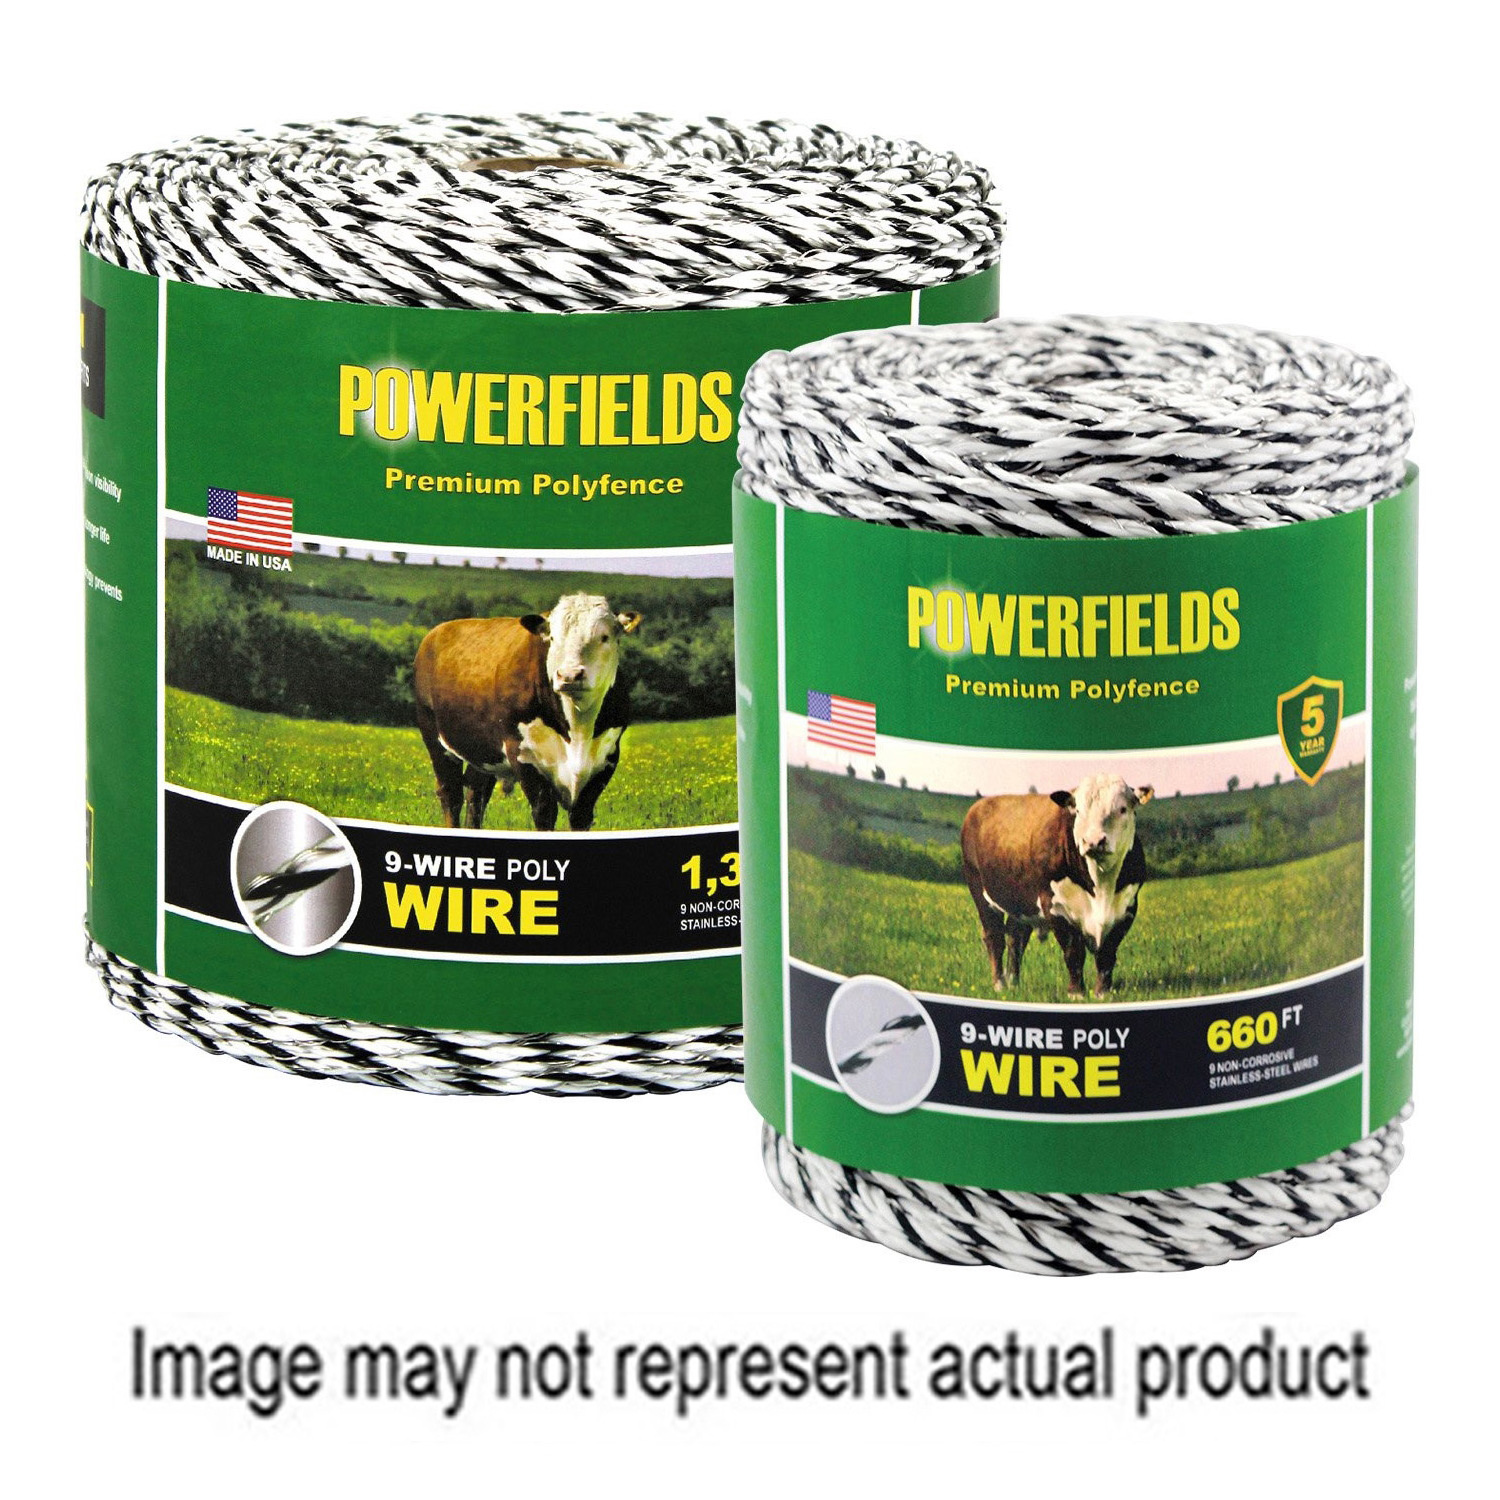 ELECTRIC FENCE POLY WIRE 6 WIRE 660' 